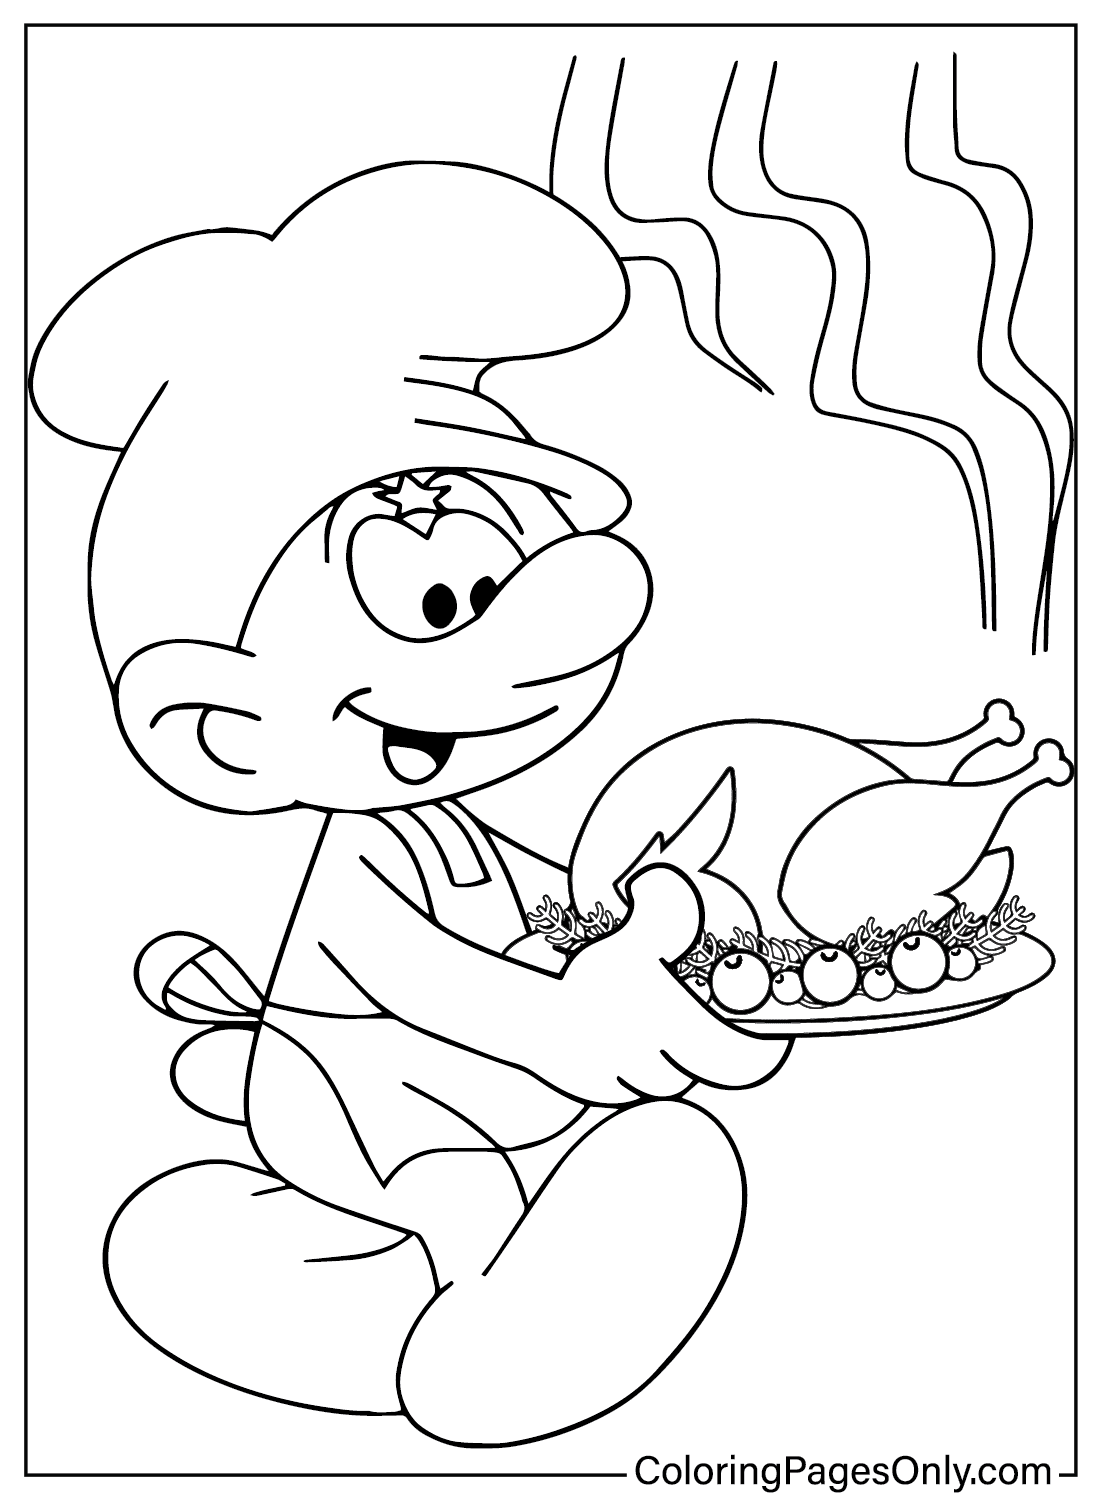 Thanksgiving Smurfs Coloring Page from Thanksgiving Cartoon